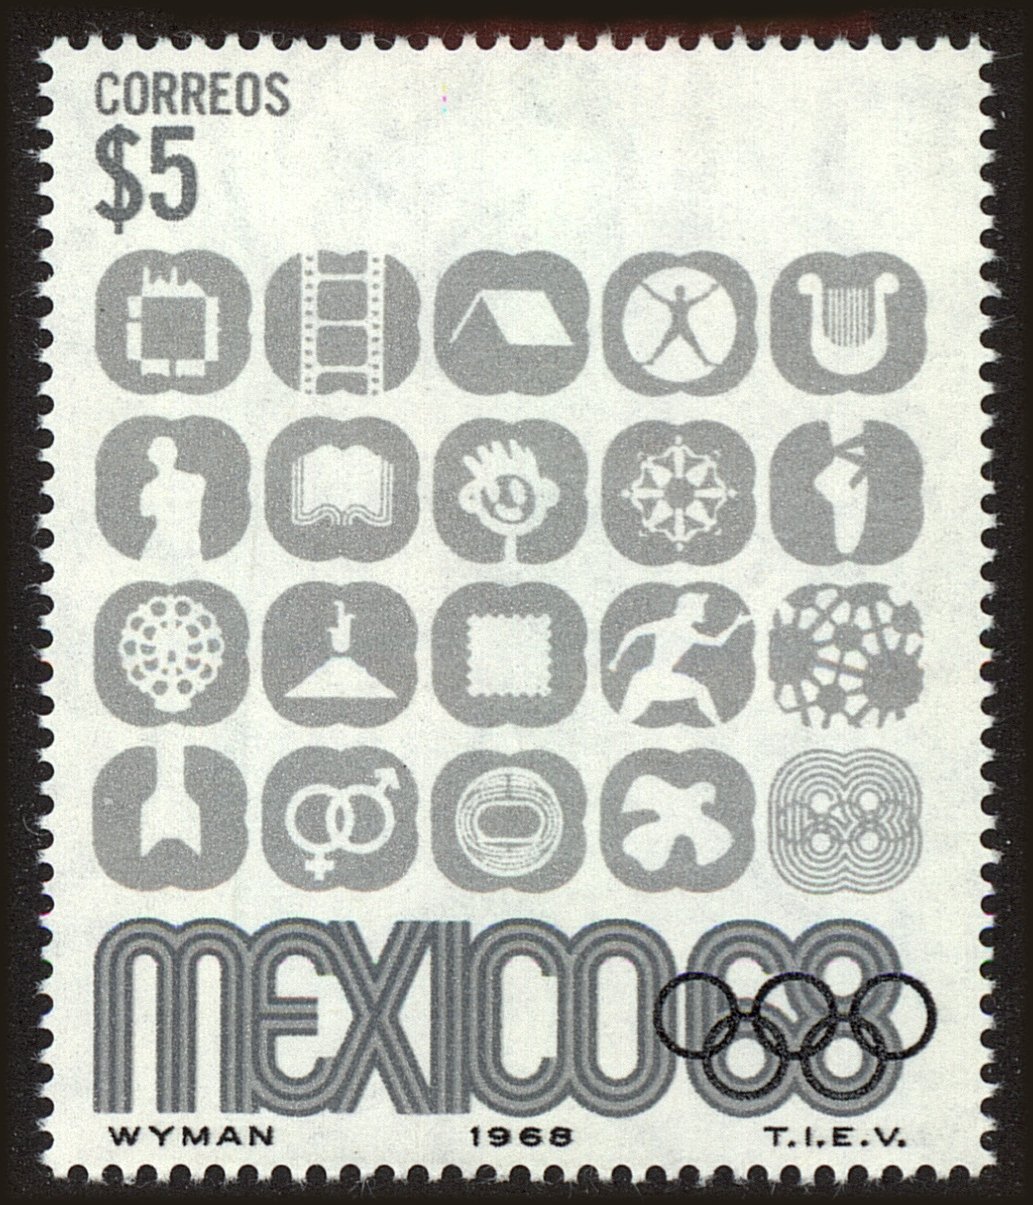 Front view of Mexico 1000 collectors stamp